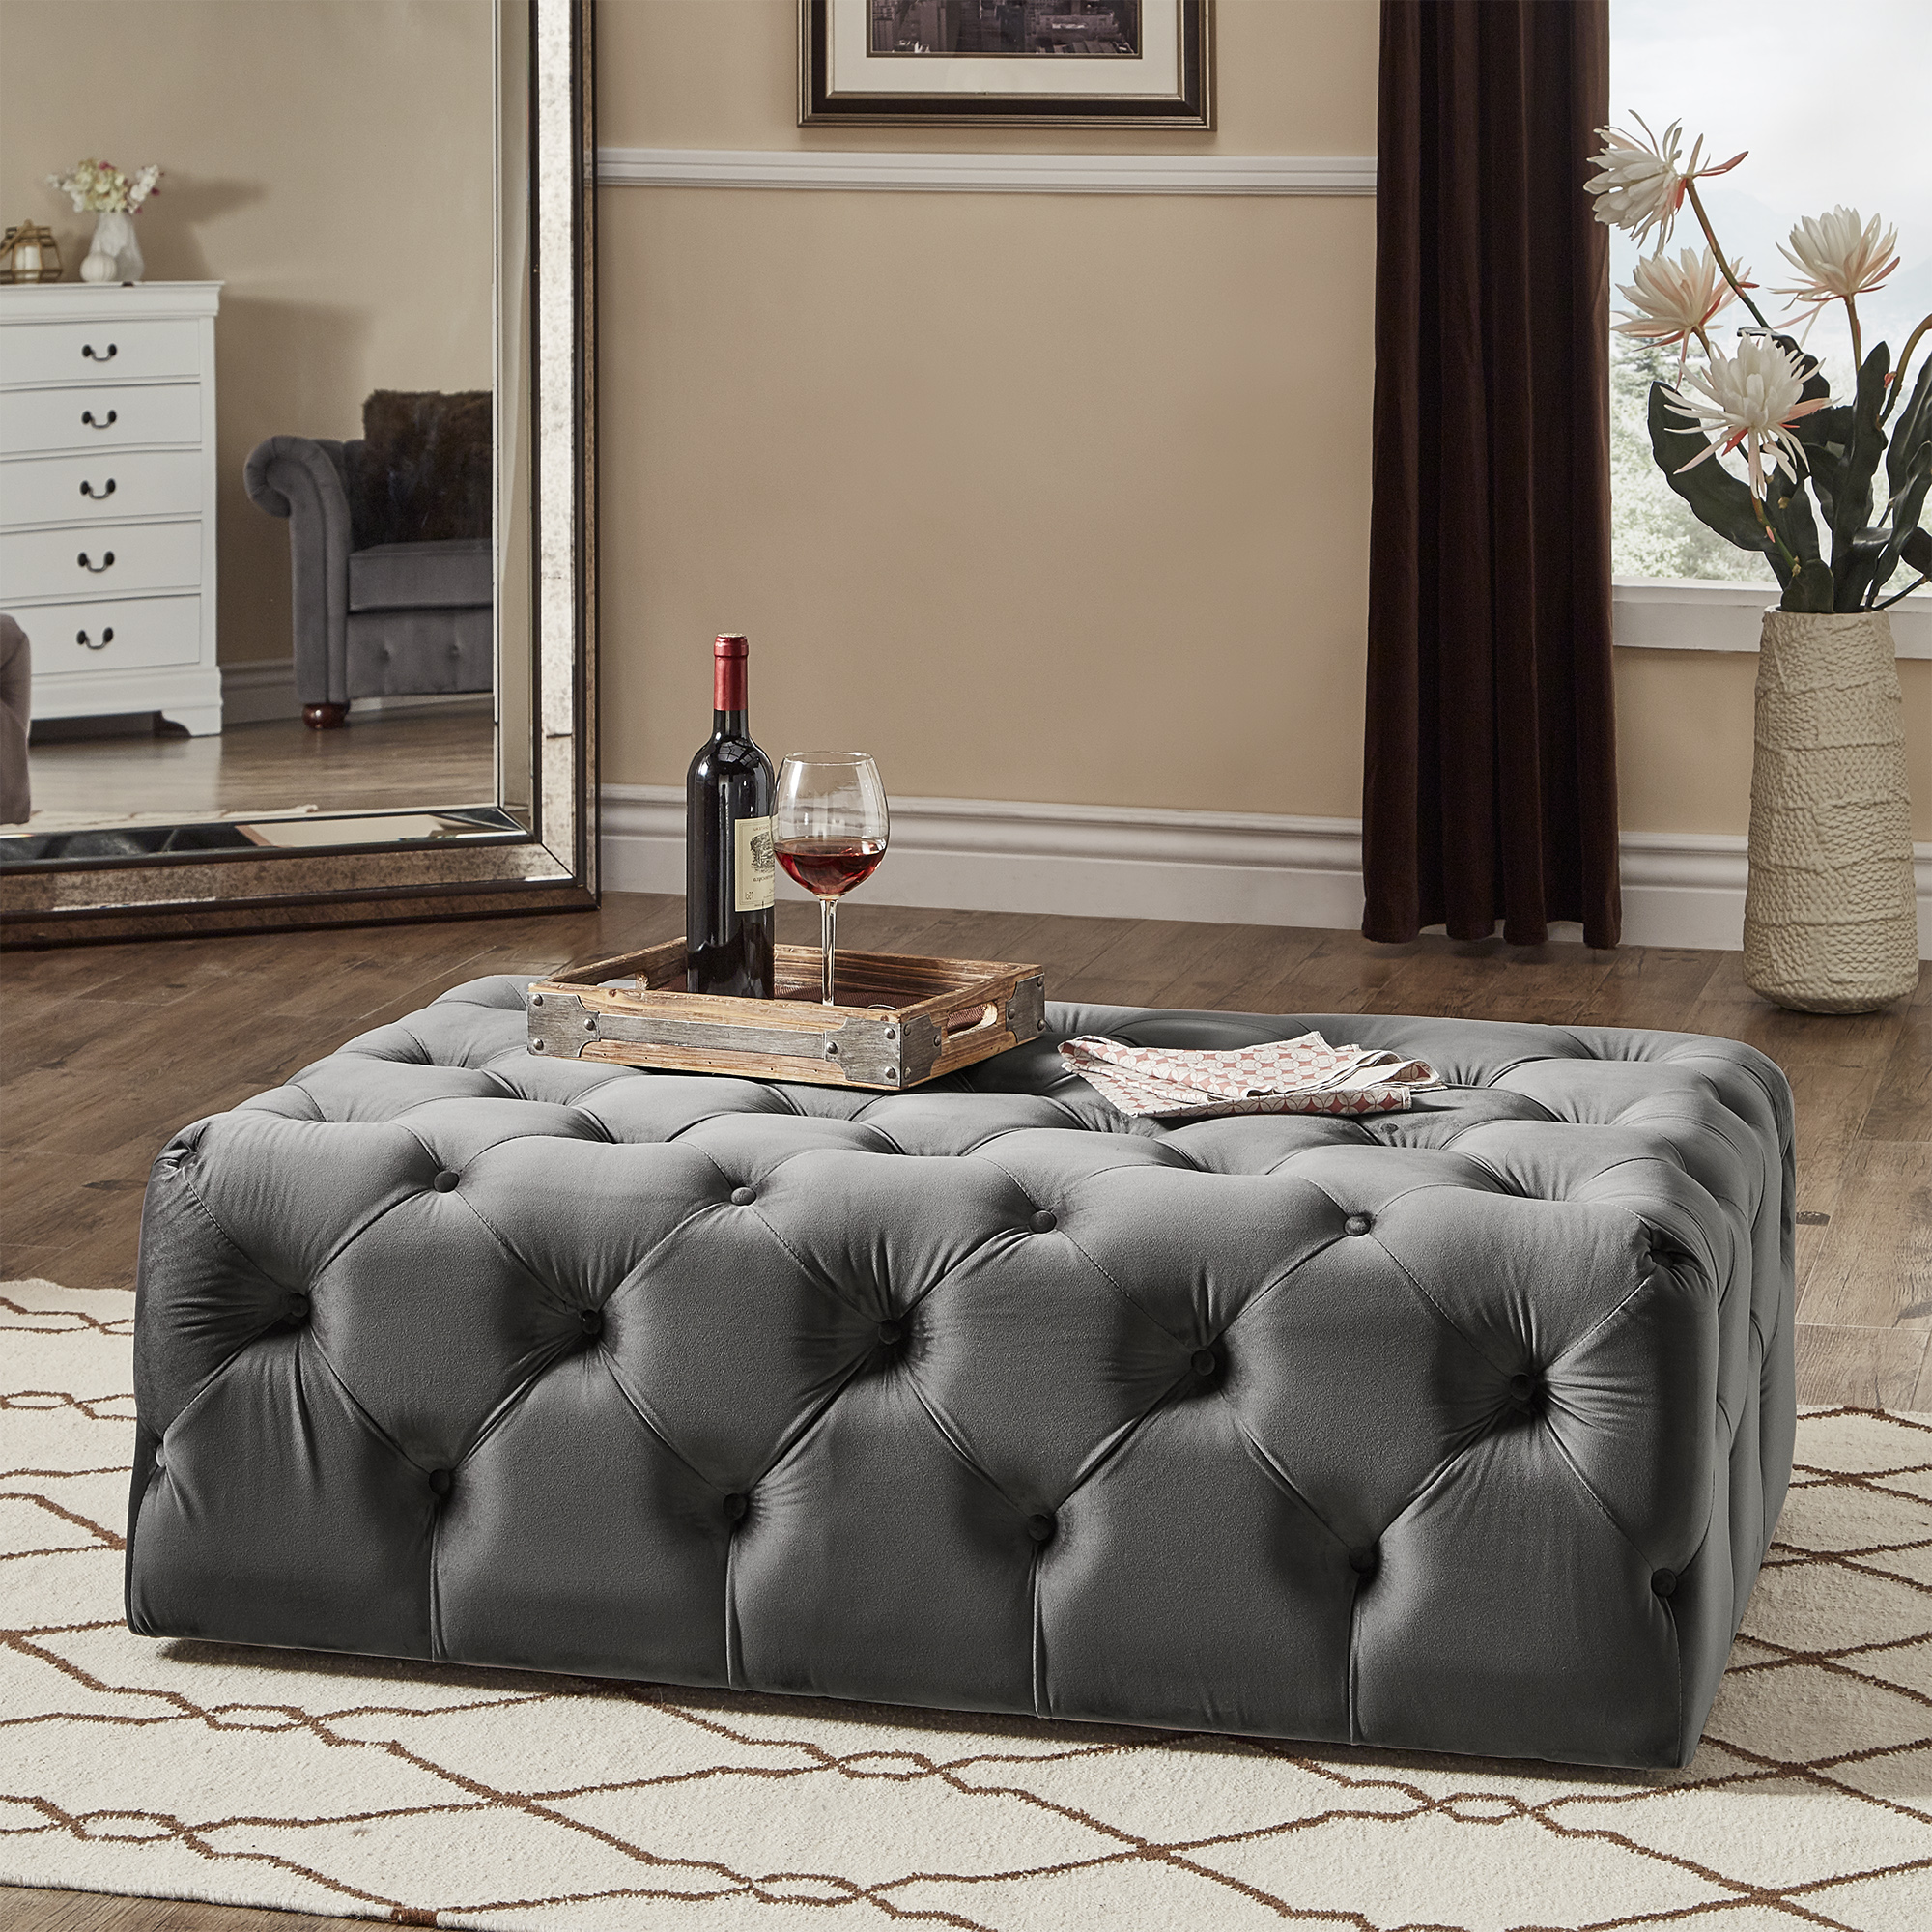 Rectangular Tufted Ottoman with Casters